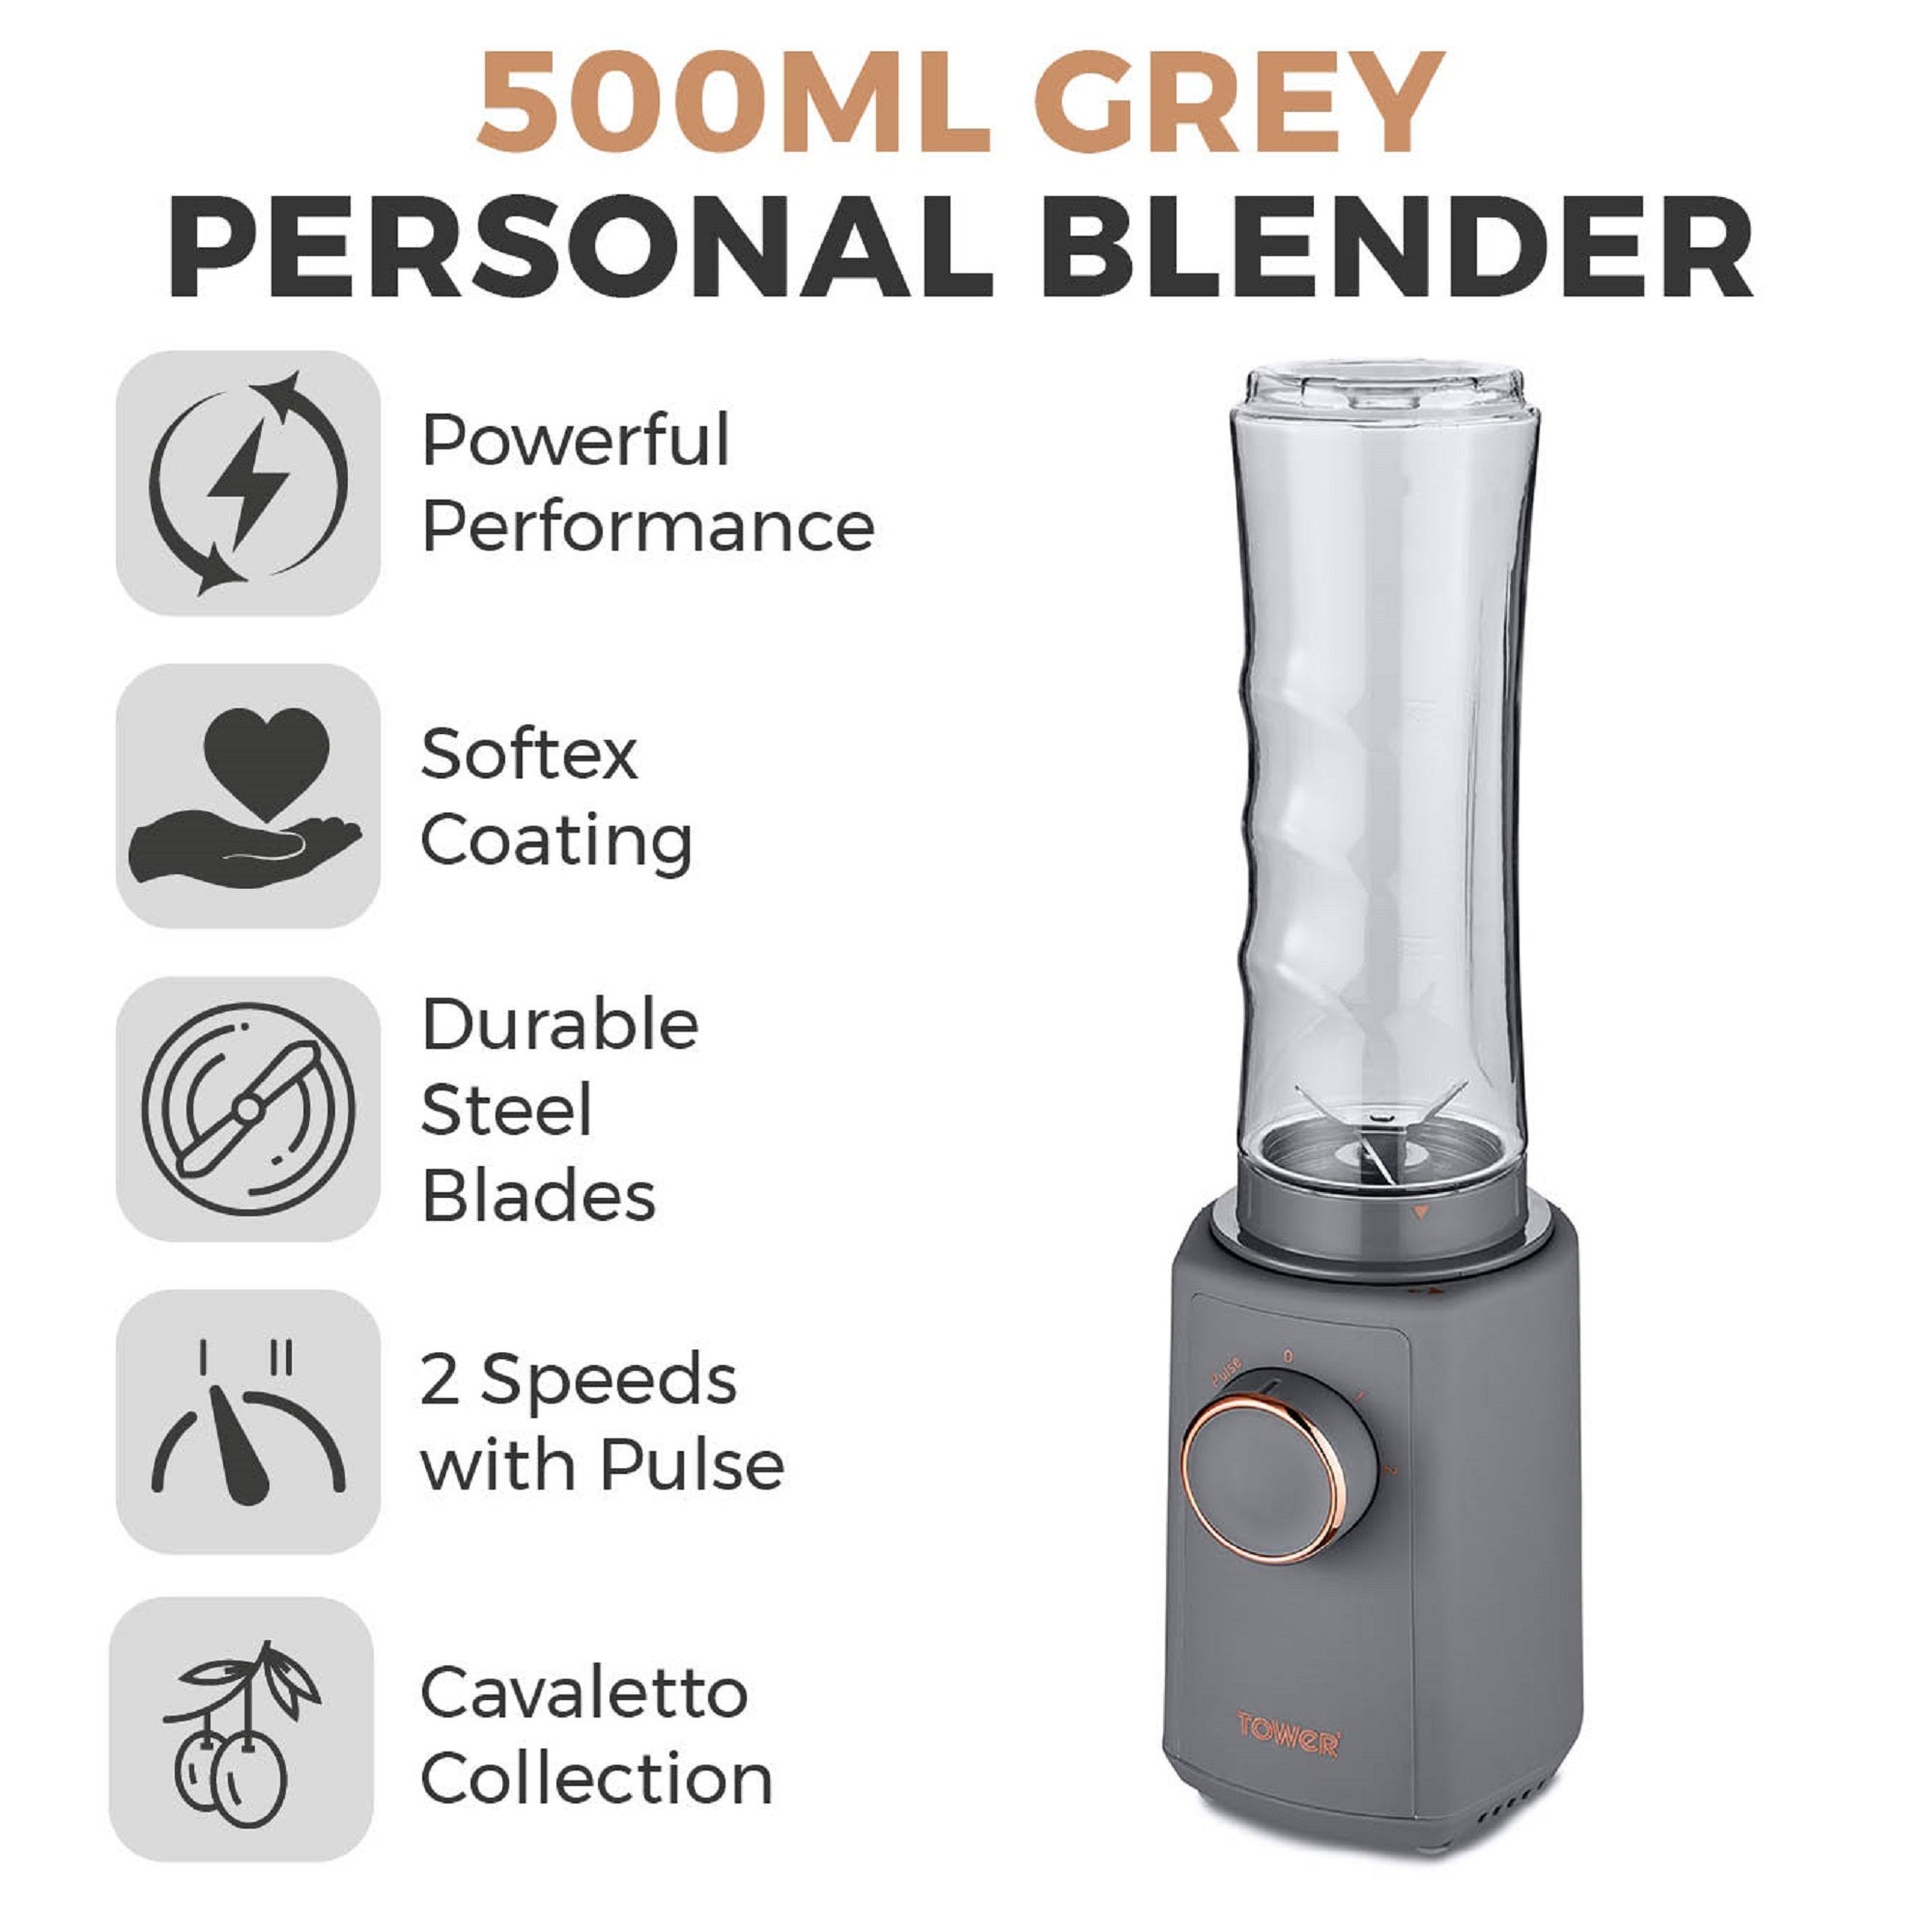 Tower Cavaletto 300w Personal Blender Grey